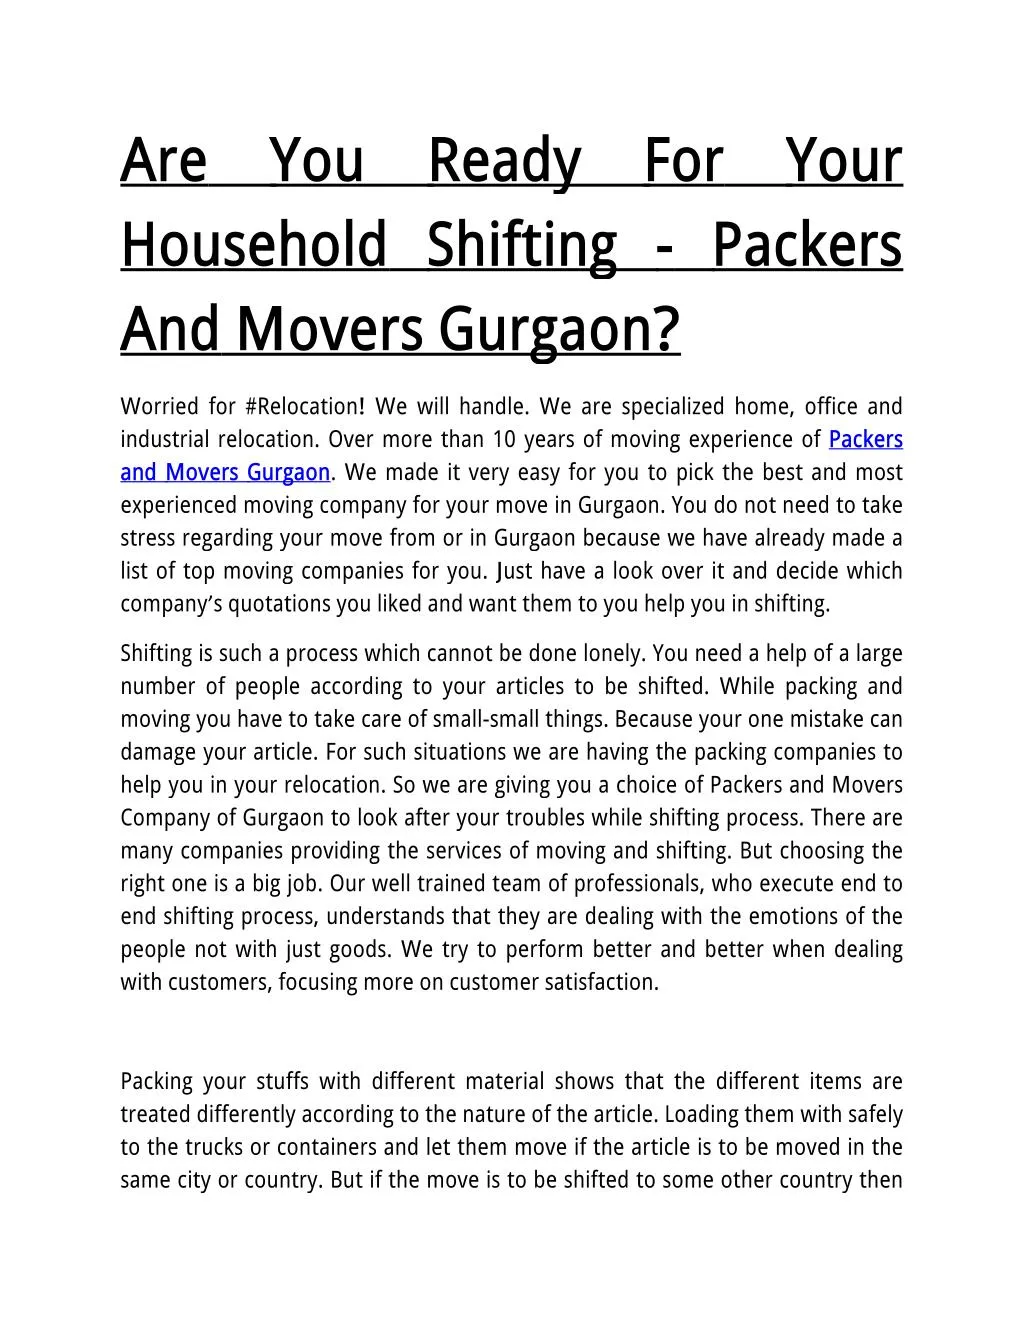 are you ready for your household shifting packers